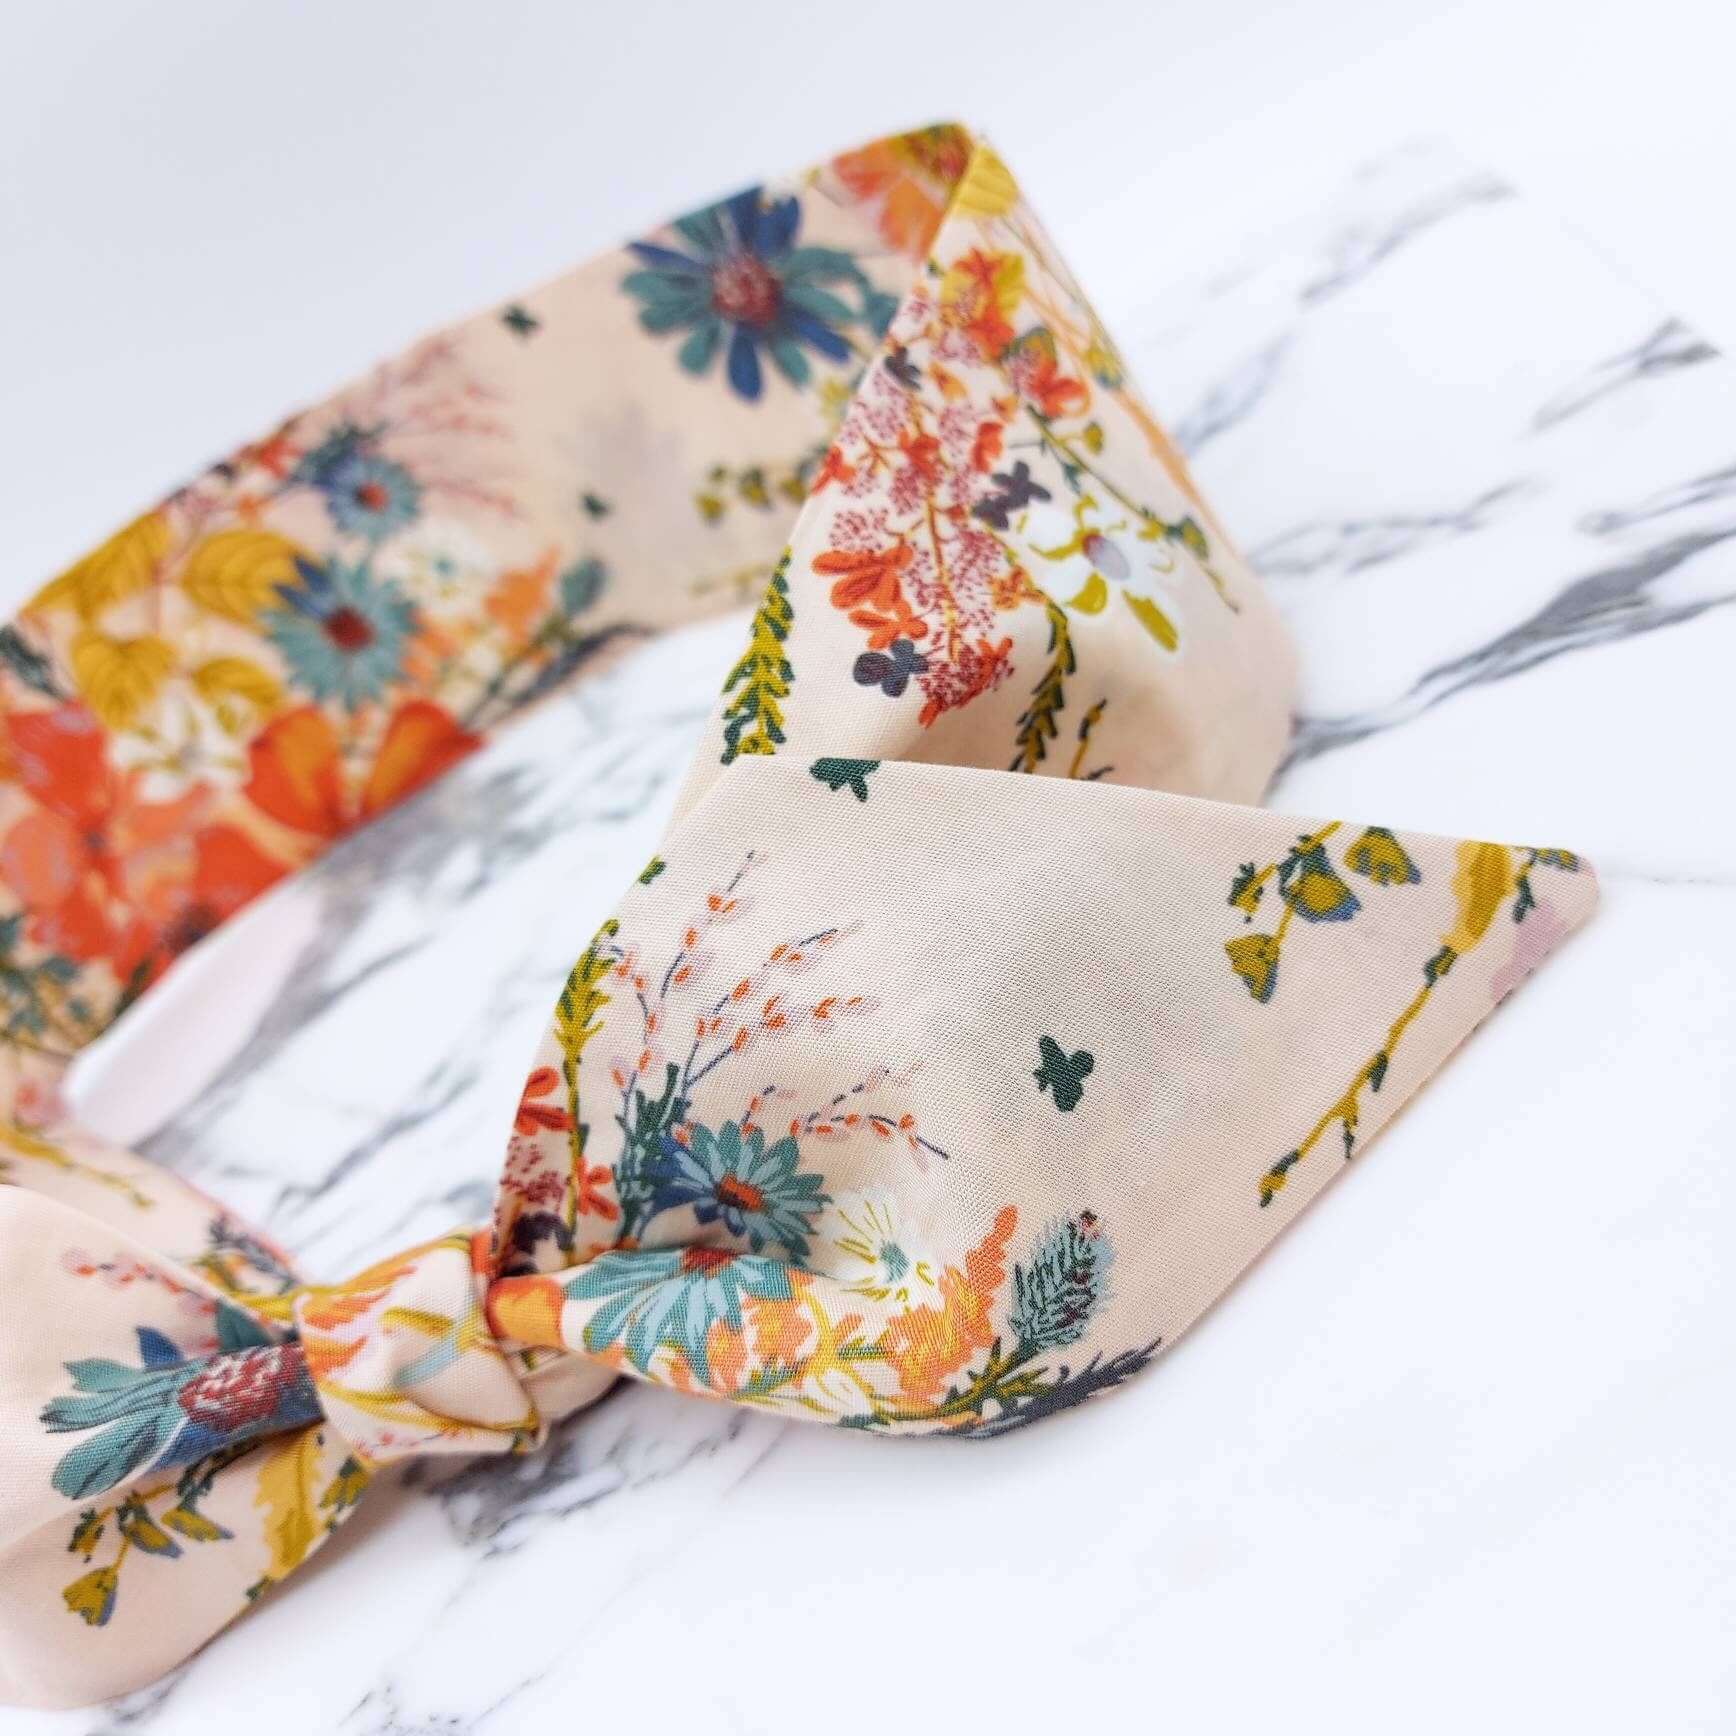 A summery cream, floral cotton headscarf with blue and orange flowers, tied in a pretty knot.